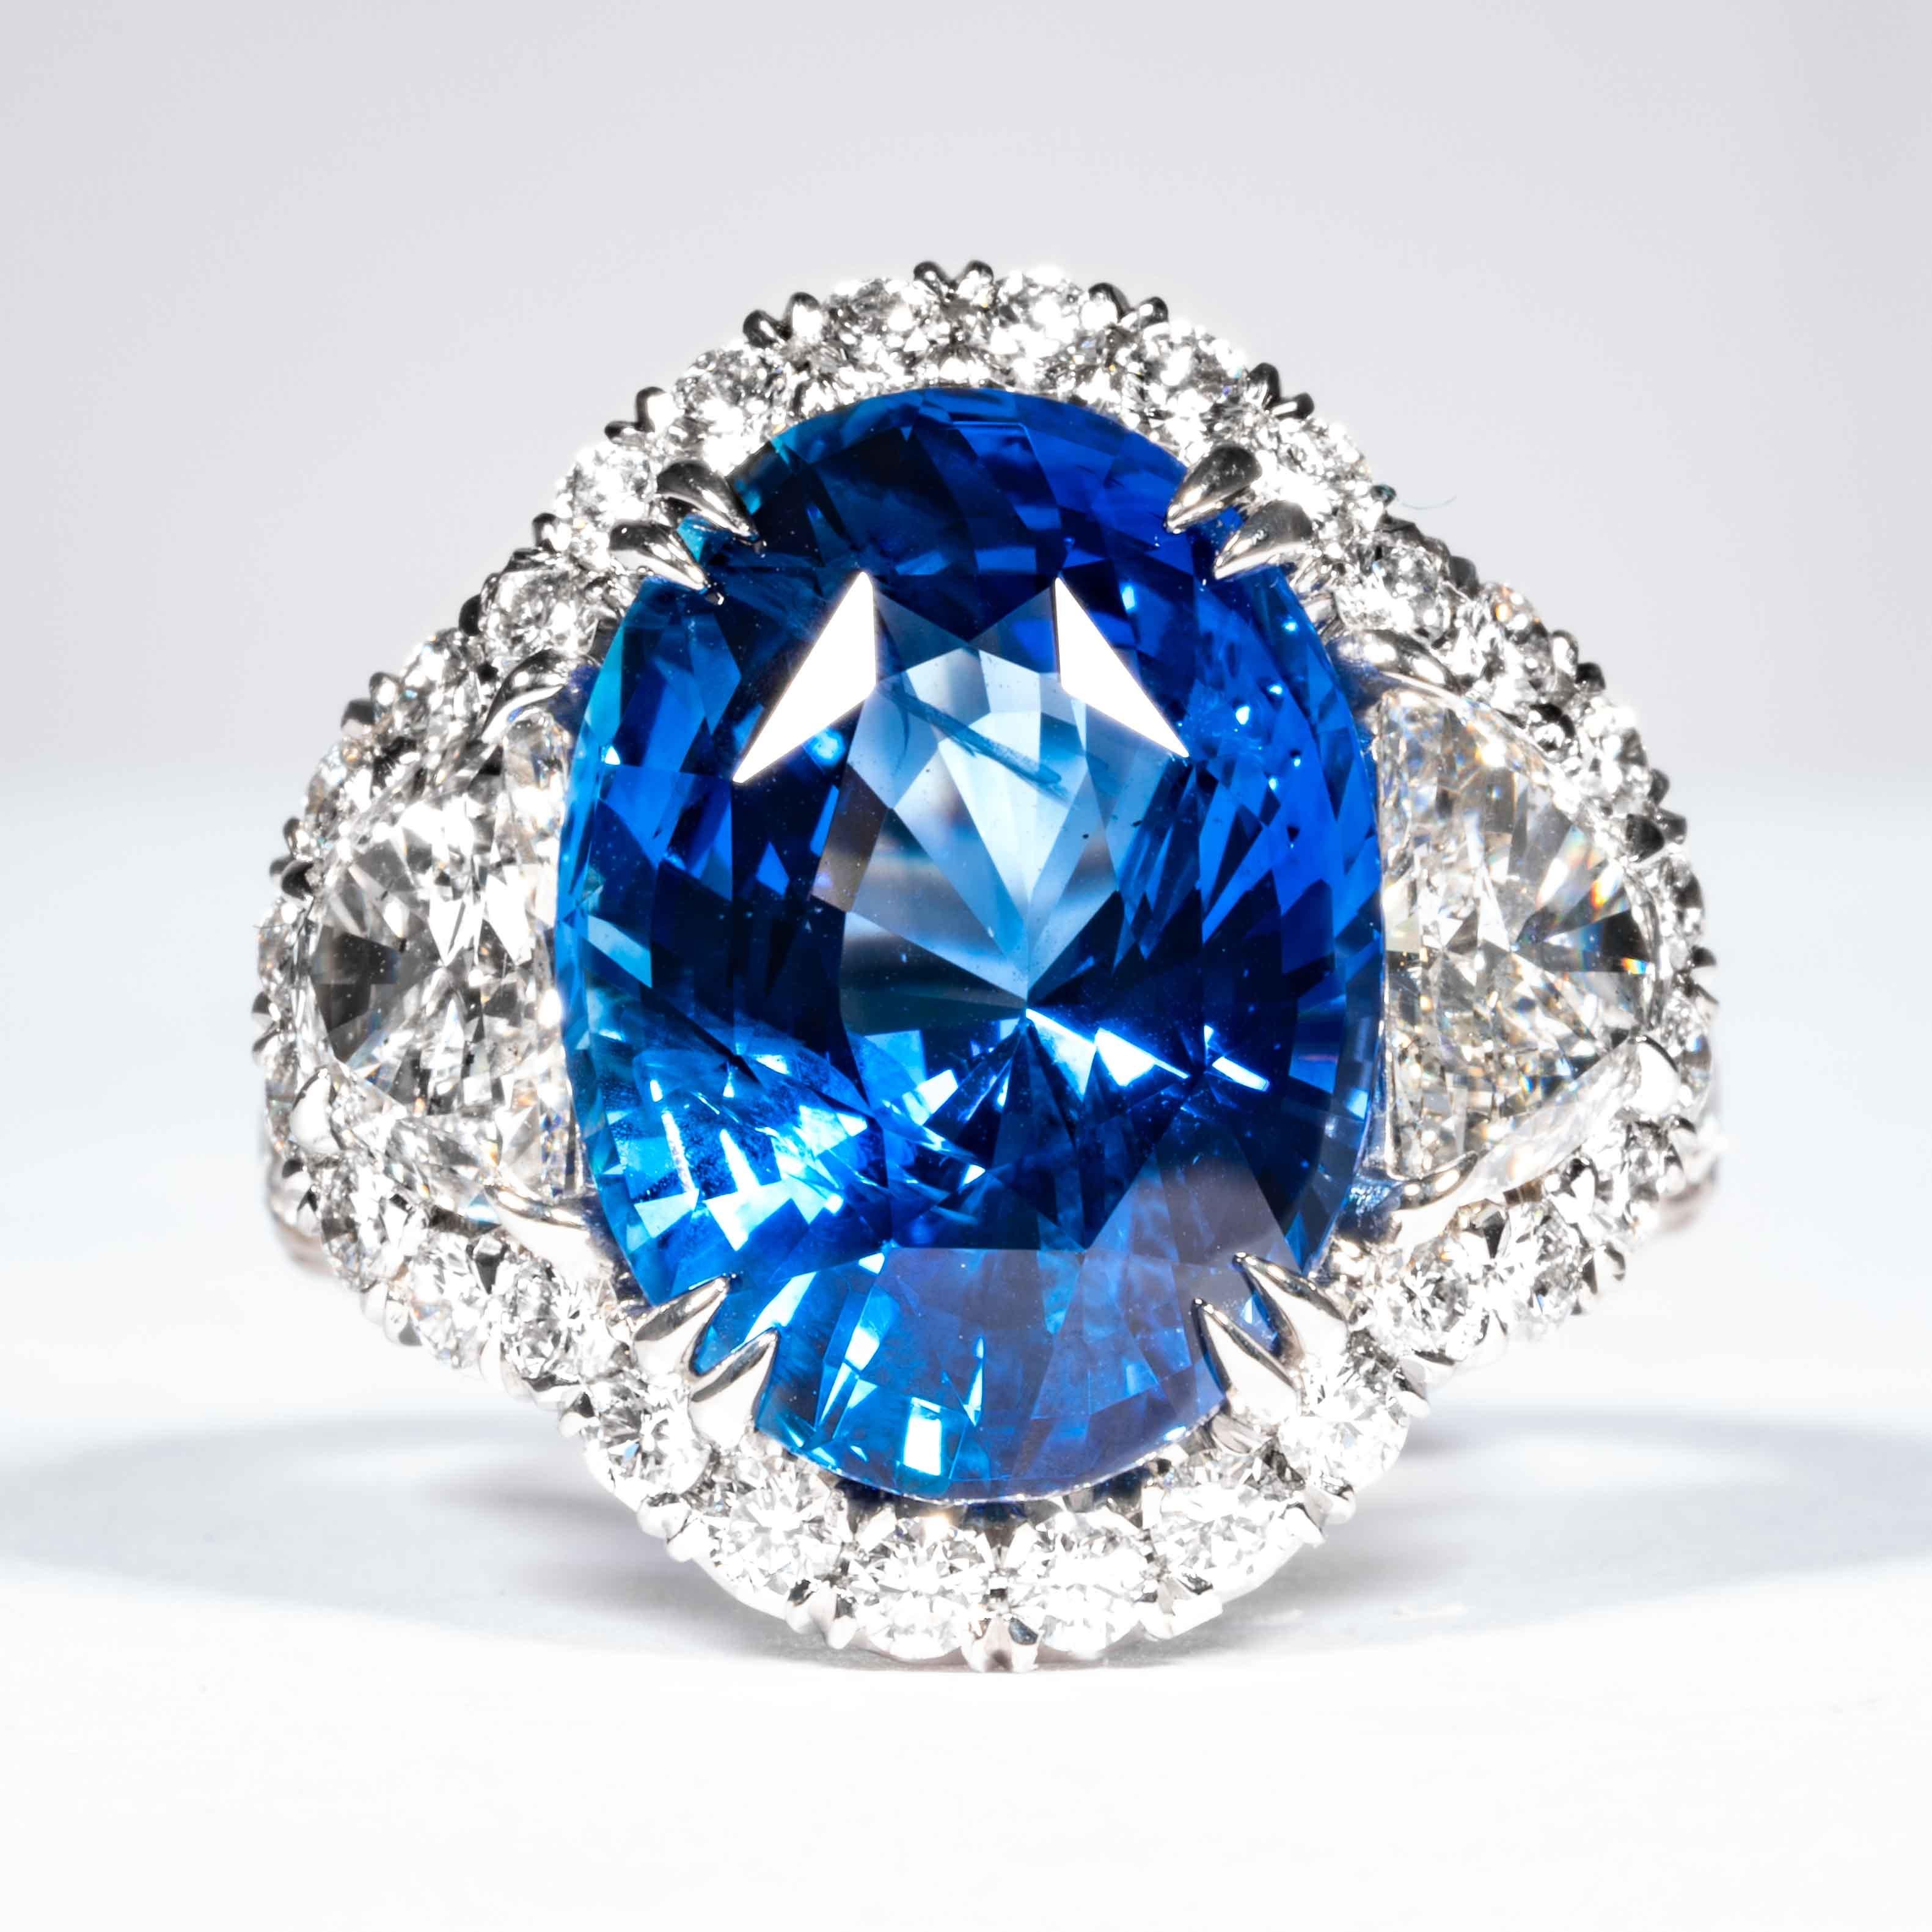 This sapphire and diamond 3-stone ring is offered by Shreve, Crump & Low.  This blue oval cut sapphire is custom set in a handcrafted Shreve, Crump & Low one-of-kind platinum ring, consisting of 1 majestic cornflower blue oval cut sapphire weighing